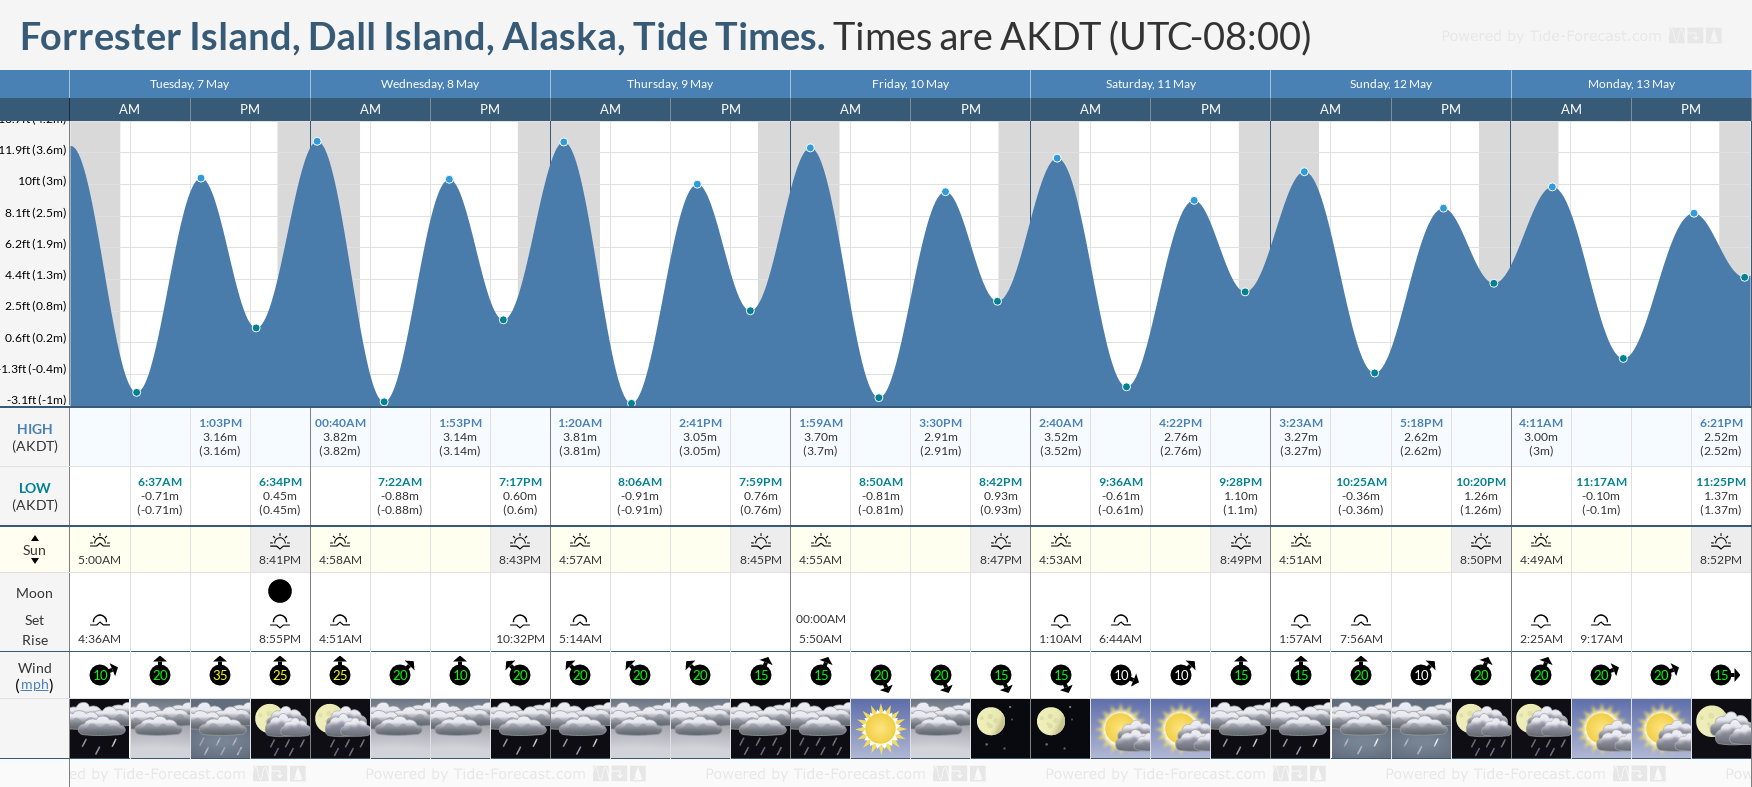 Forrester Island, Dall Island, Alaska Tide Chart including high and low tide tide times for the next 7 days